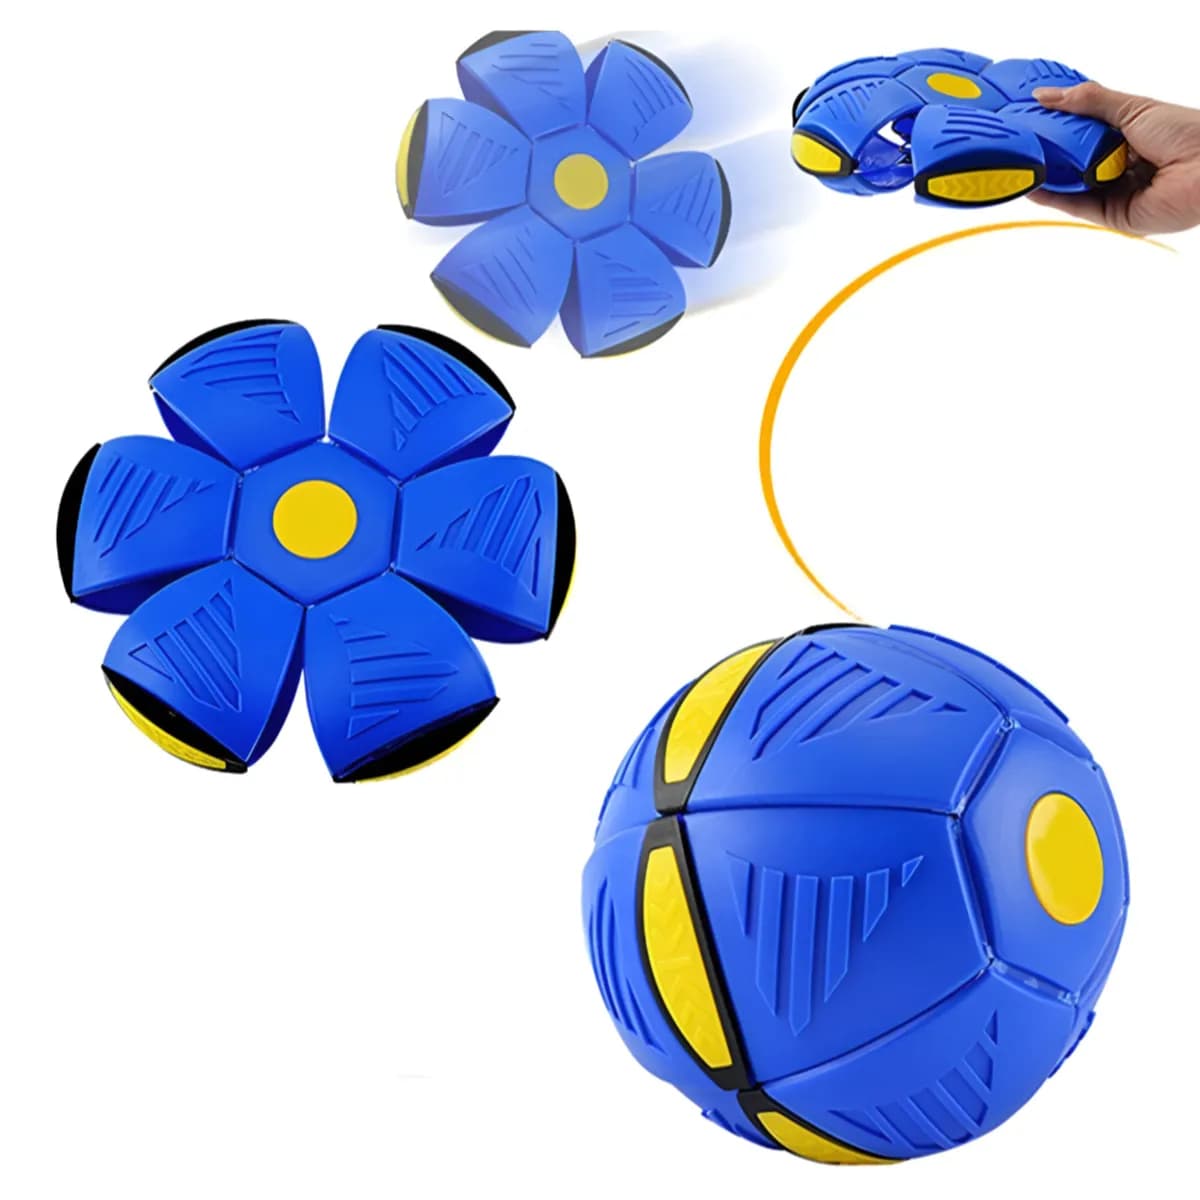 Playcast Kids Magic Flying Disc Ball With LED Lights Assorted Colours 1  Piece Set - (PSFS41)